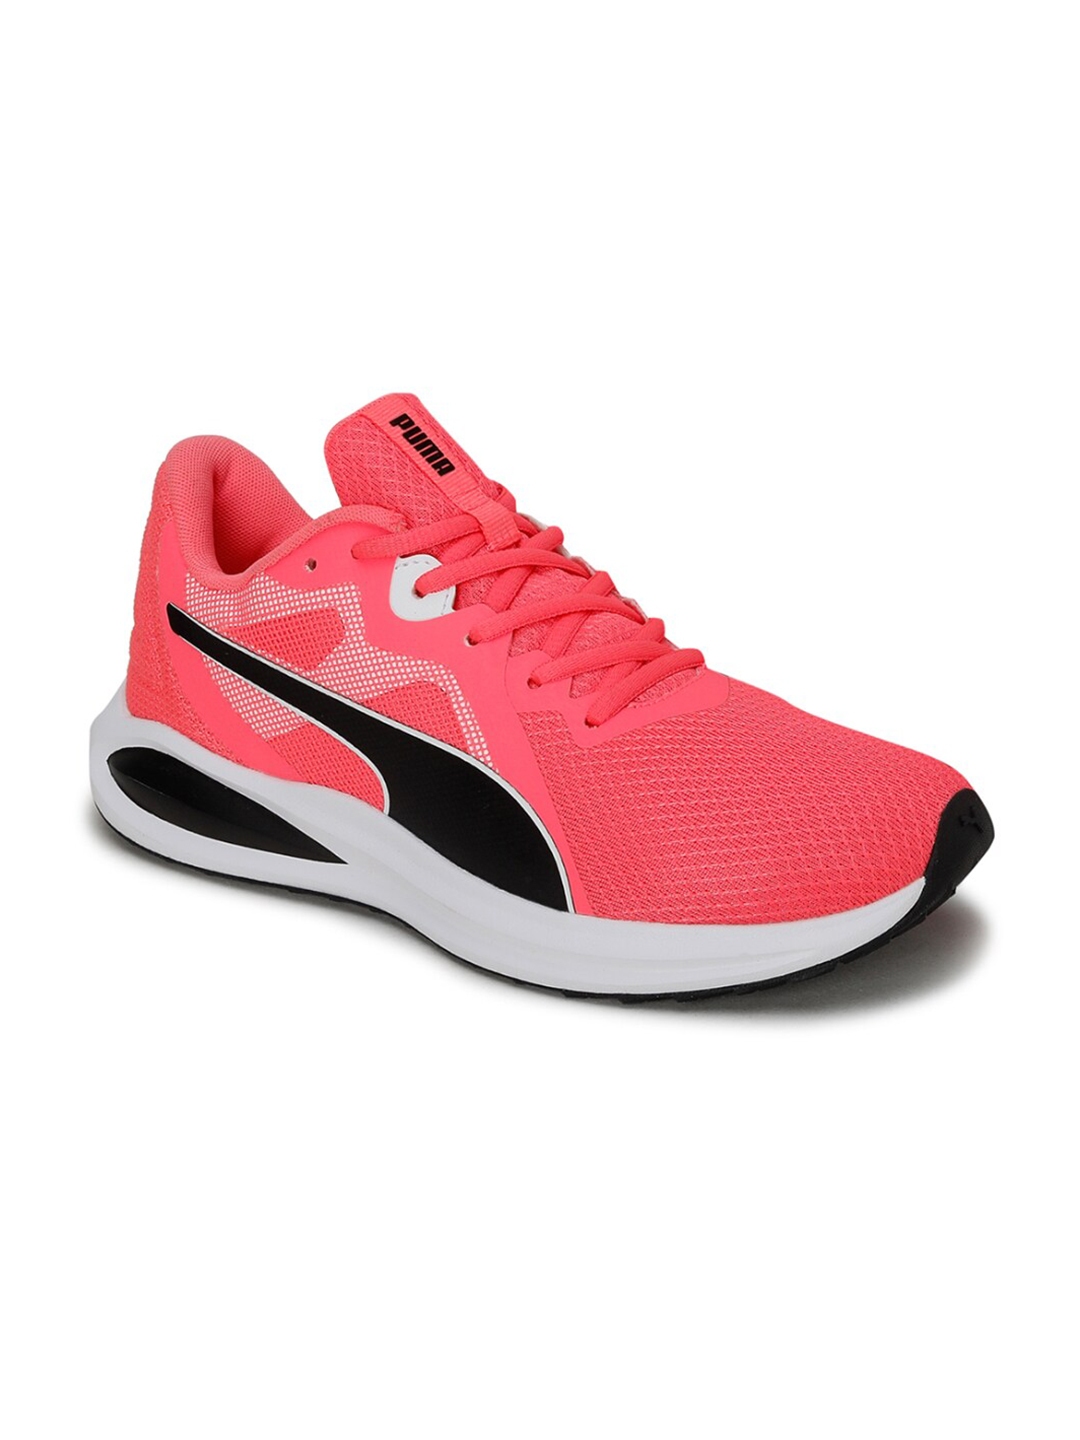 Buy Puma Unisex Pink Twitch Running Shoes - Sports Shoes for Unisex ...